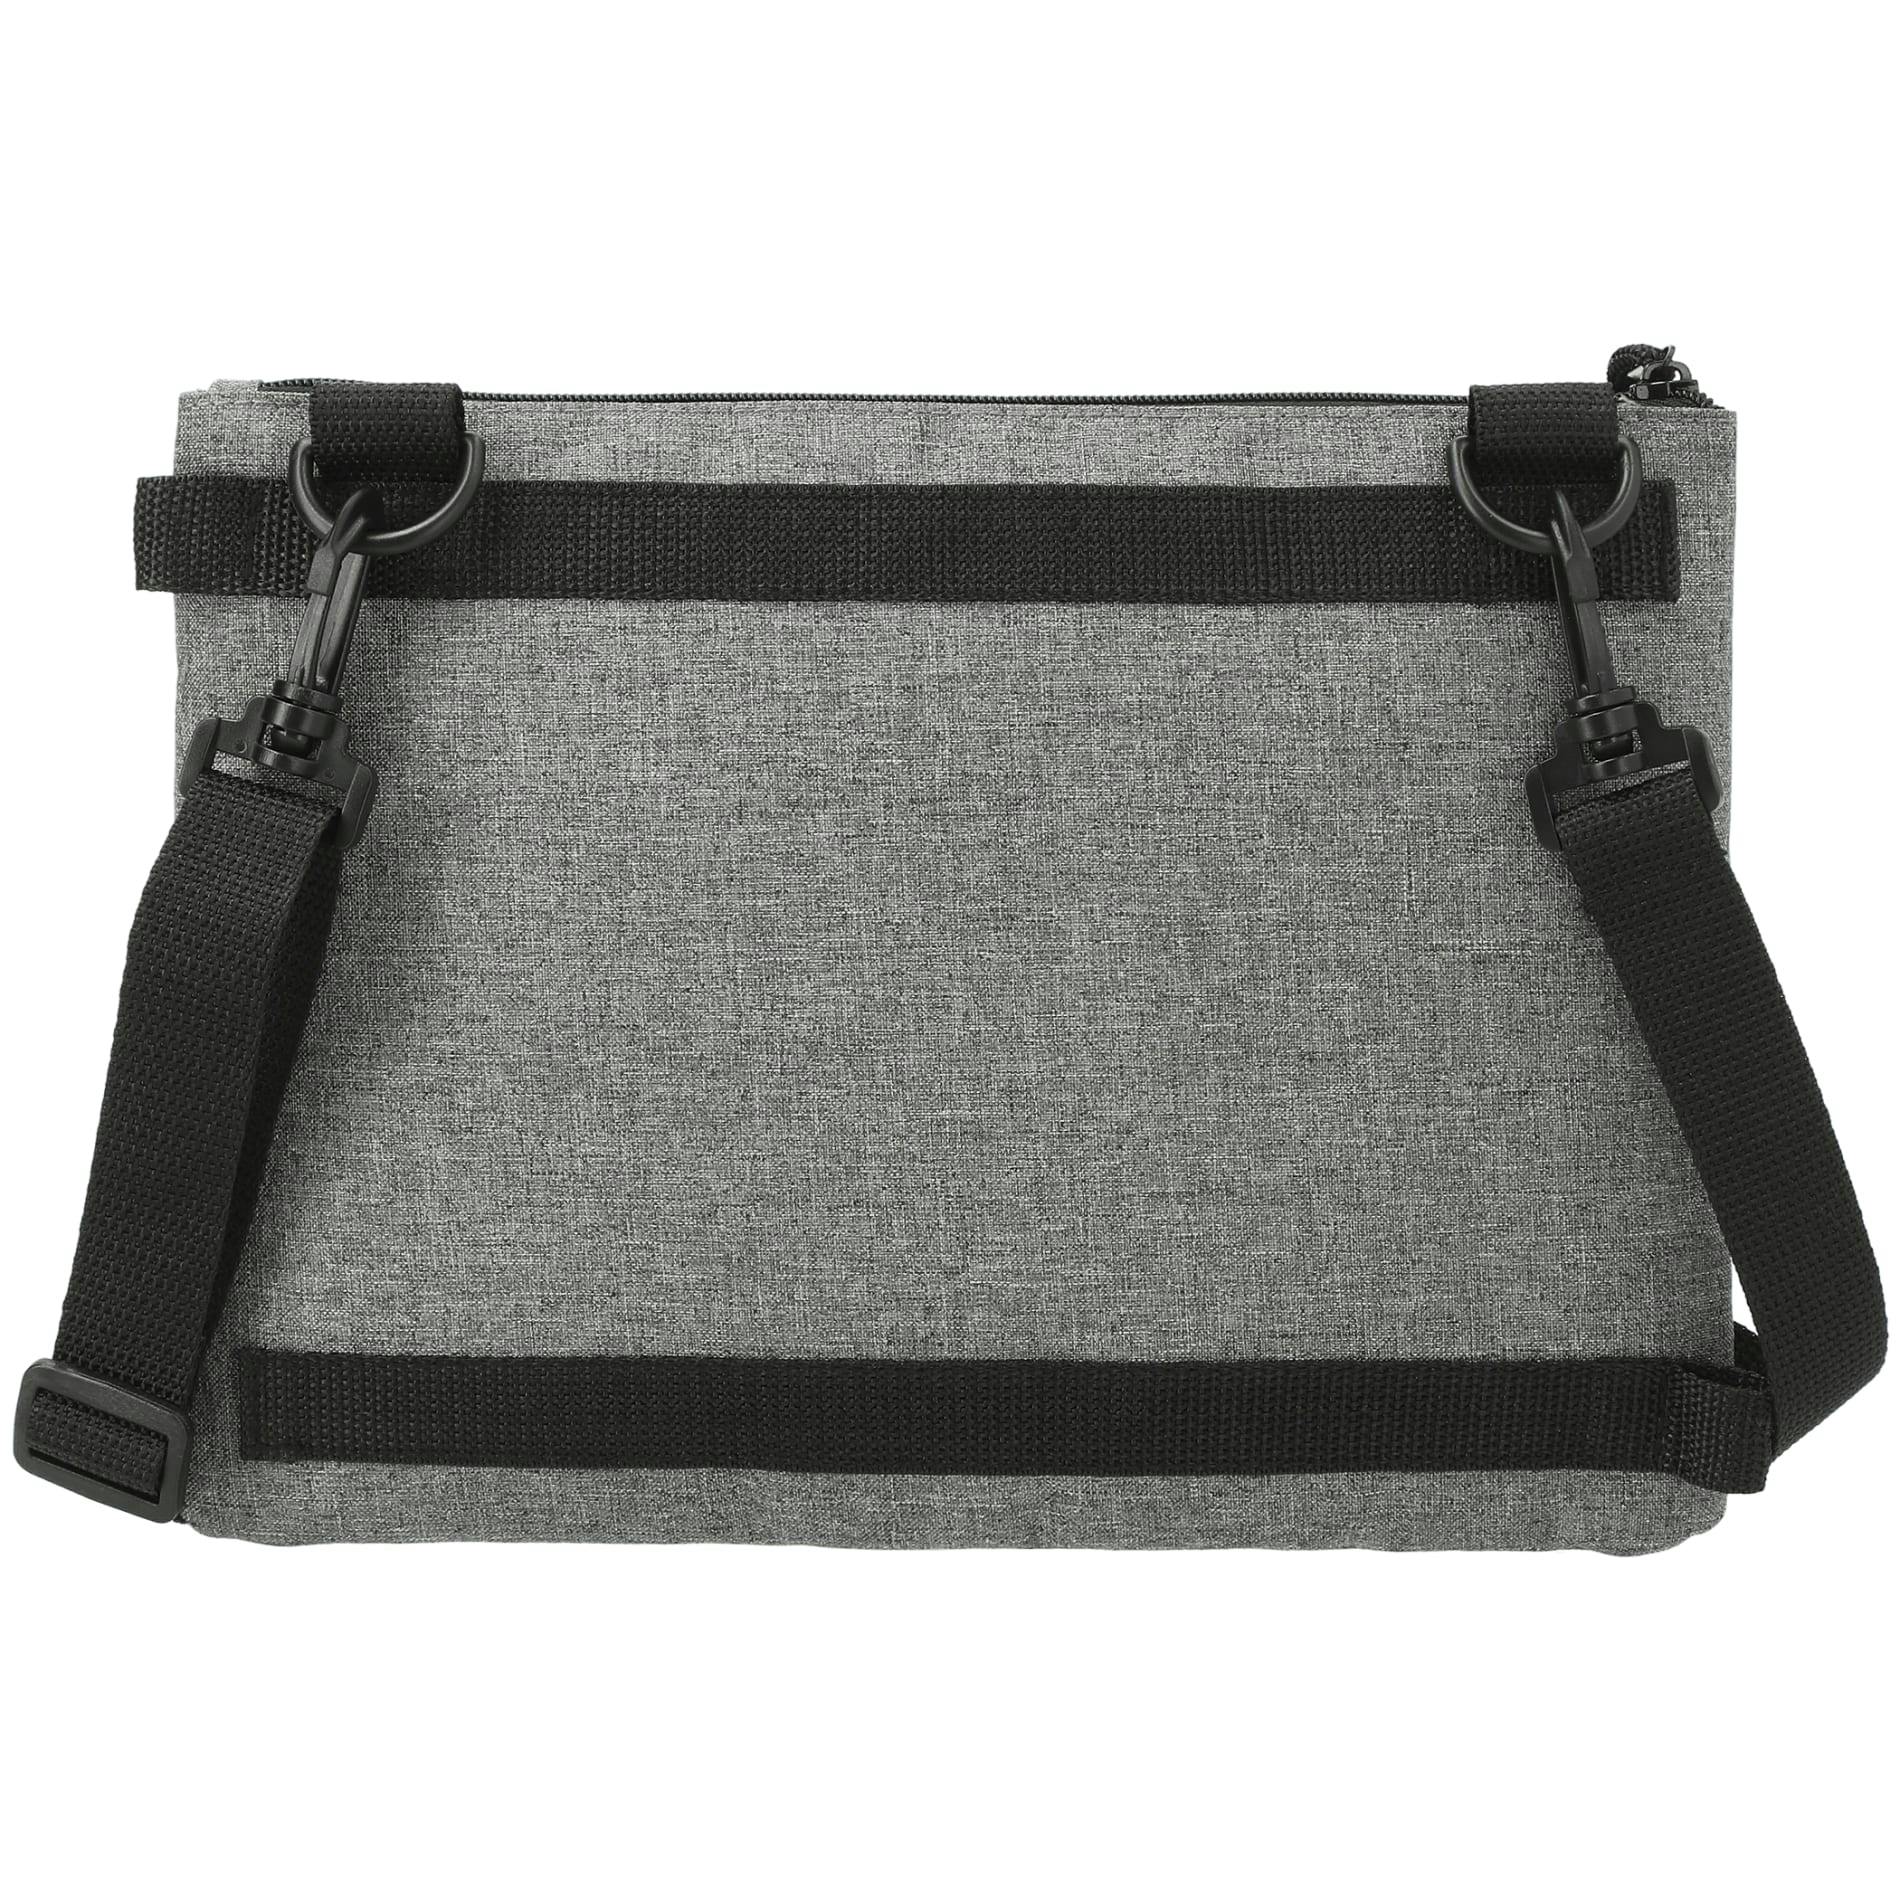 Convertible Sling - additional Image 1